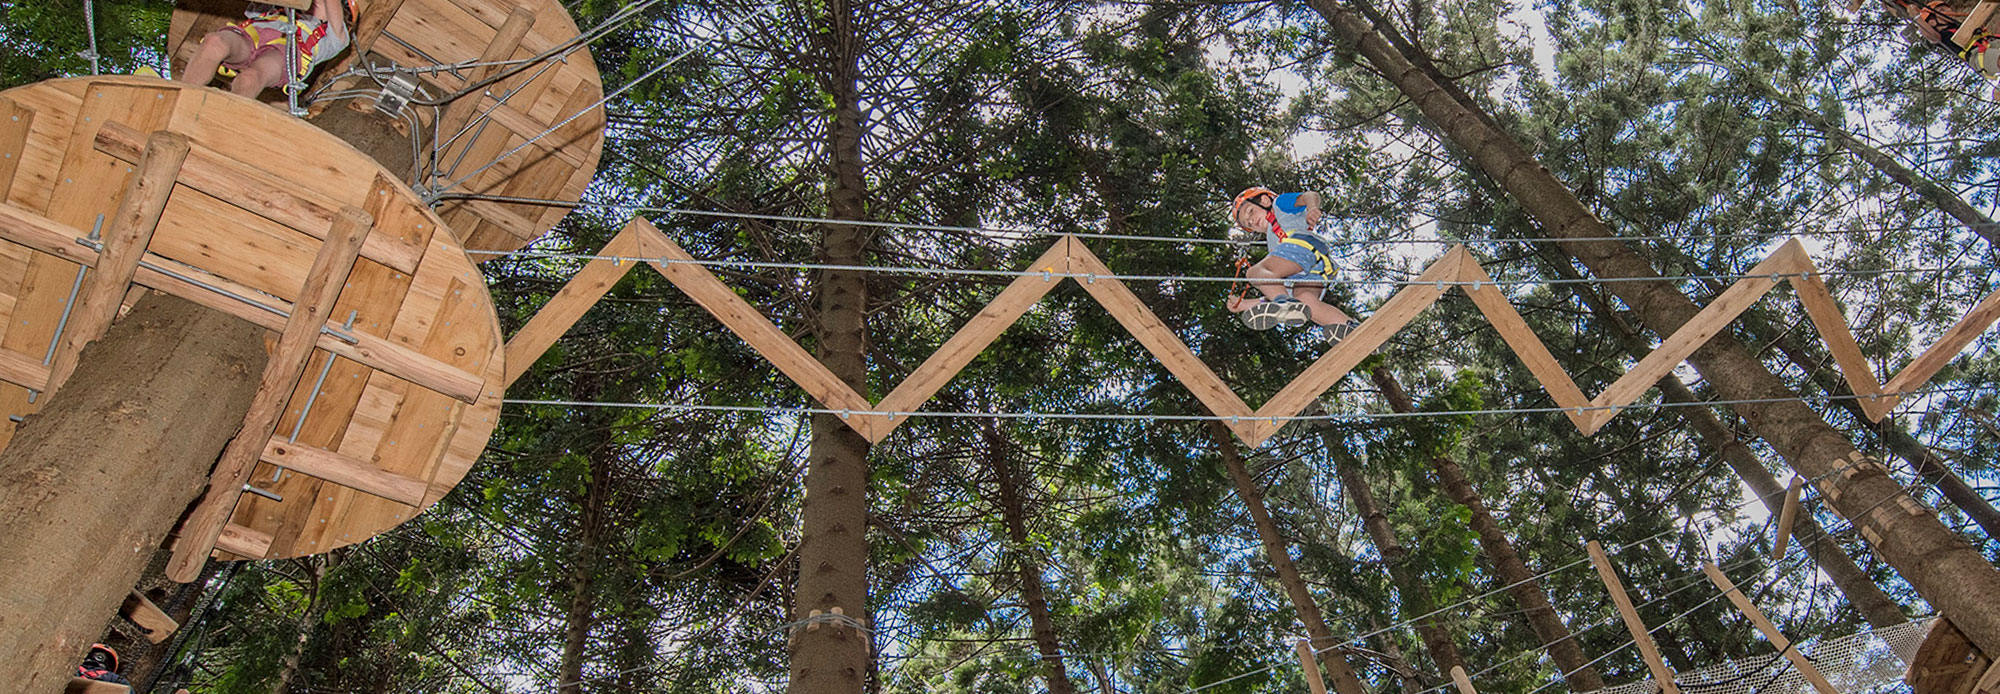 Treetops Adventure The Hills High Ropes Course